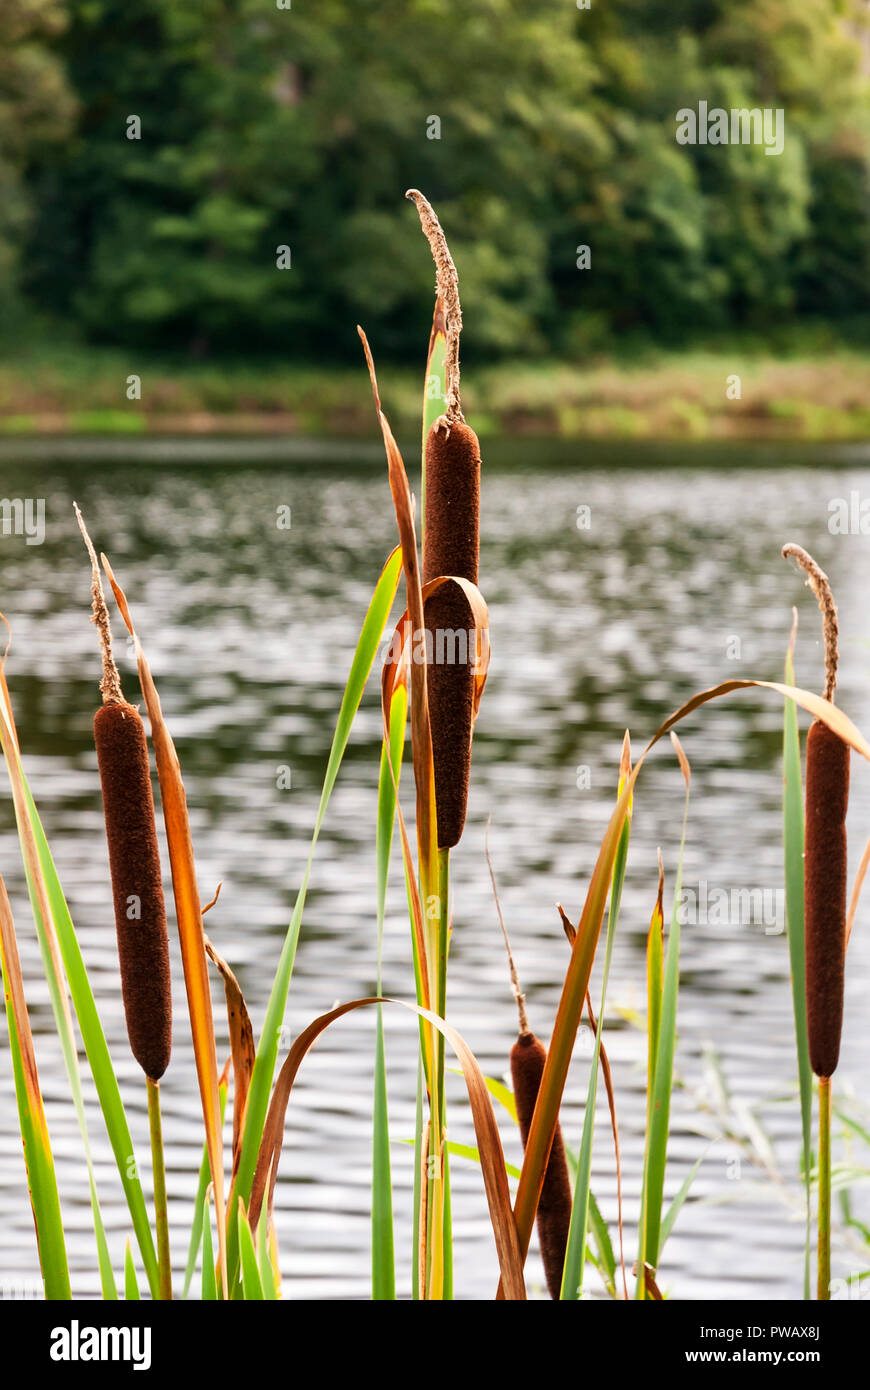 Bulrush or Reedmace, Typha latifolia, plants at the edge of a large pond, Yorkshire, England. 15 September 2007 Stock Photo